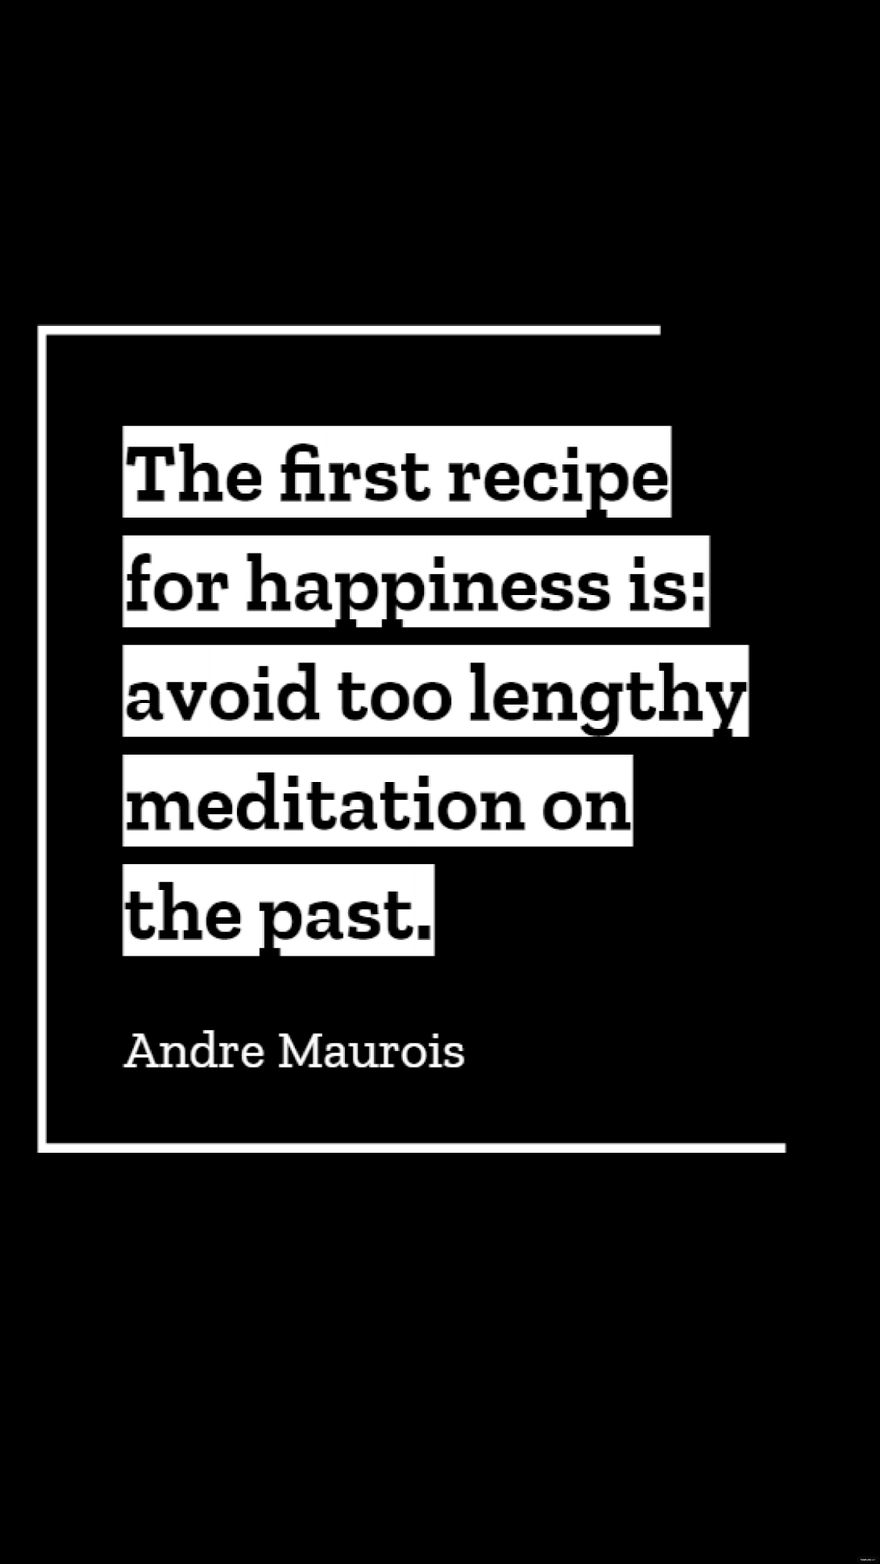 Free Andre Maurois - The first recipe for happiness is: avoid too lengthy meditation on the past.